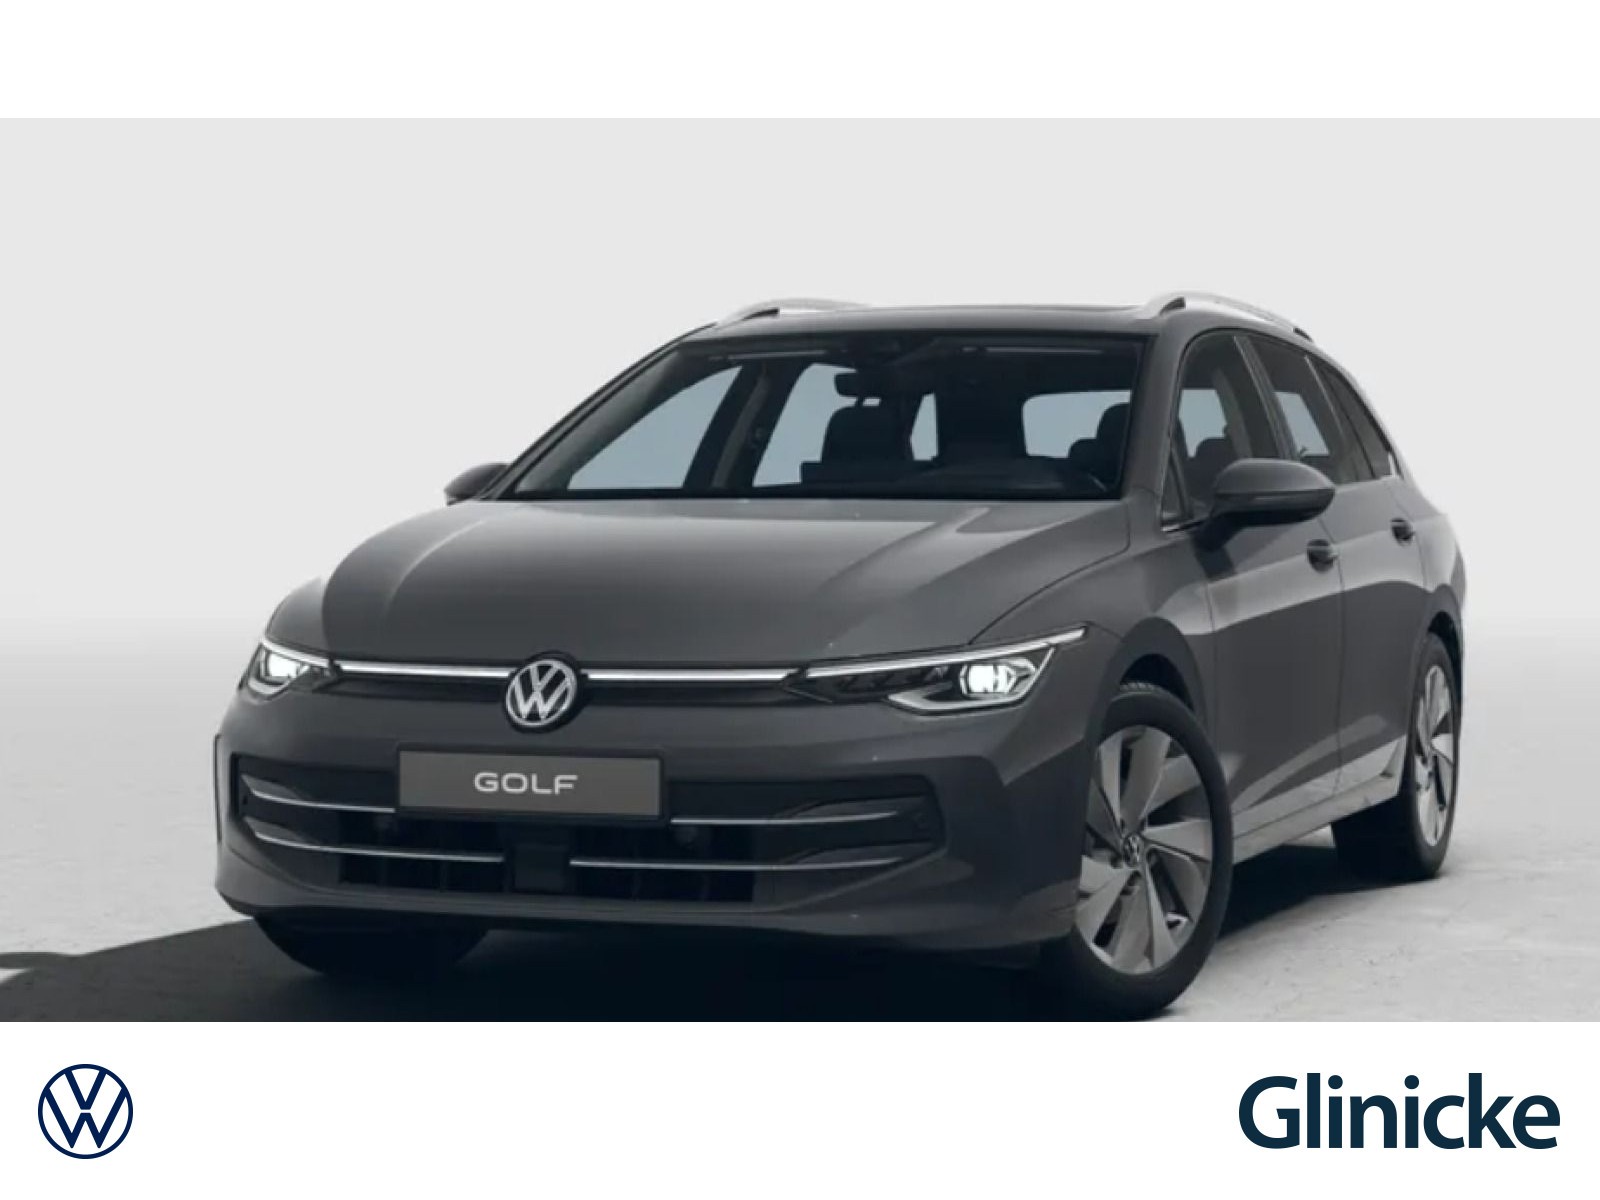 Golf Variant Style 1,5 l eTSI OPF 110 kW (150 PS) 7-Gang-DSG *AreaView*Pano*Assistenzpaket*